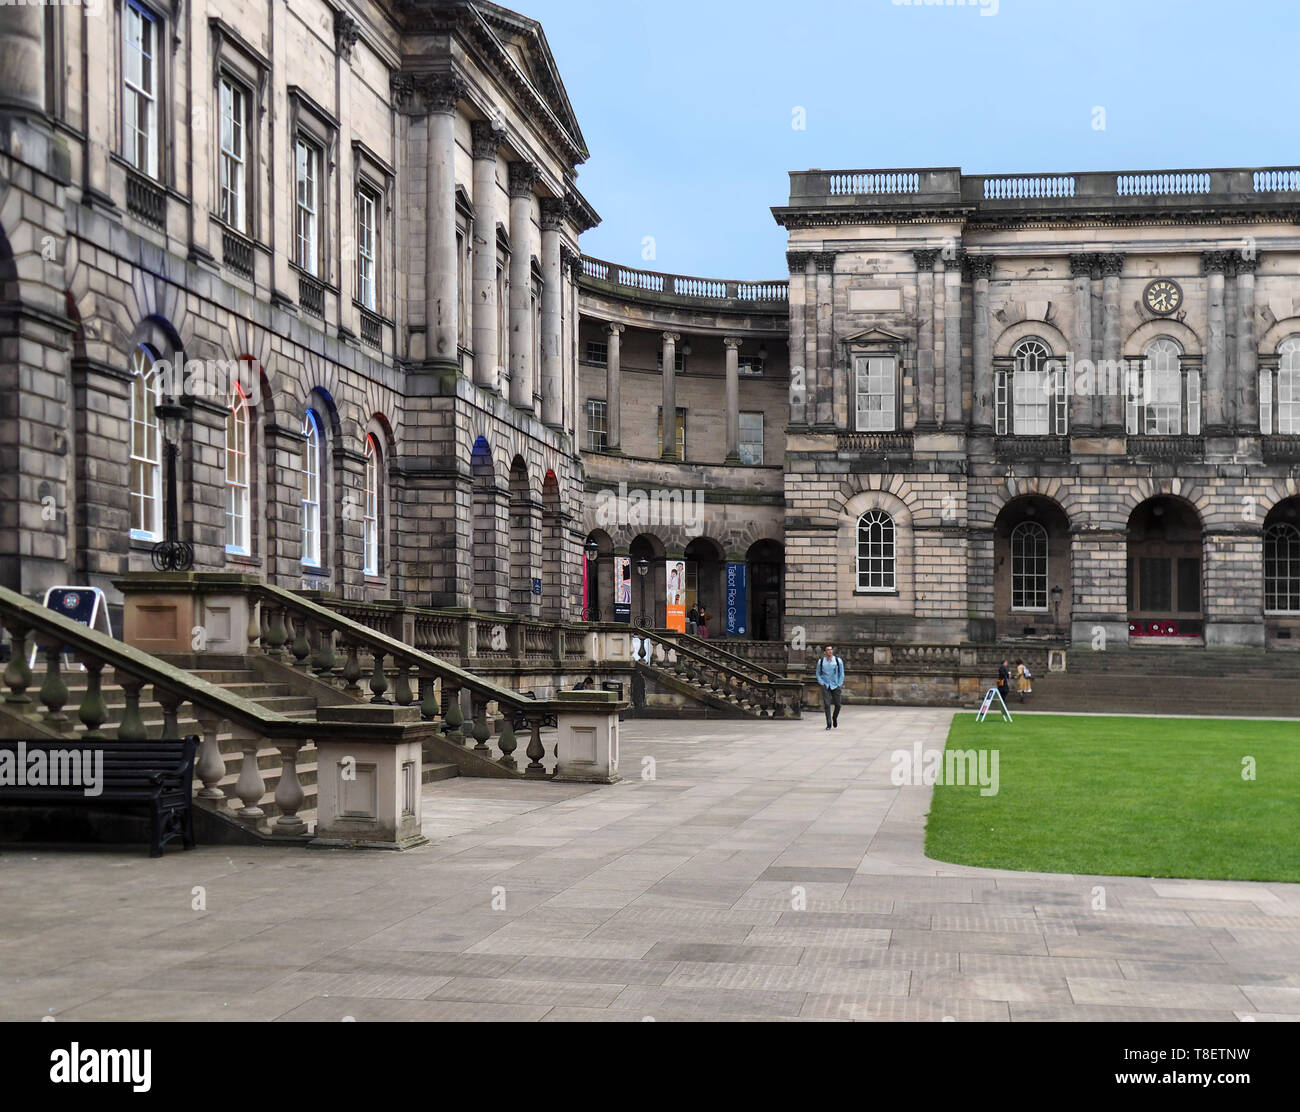 EDINBURCH - SEPTEMBER 2016:  The classical stone campus of the University of Edinburgh's Old College is located on a quadrangle that dates from the mi Stock Photo